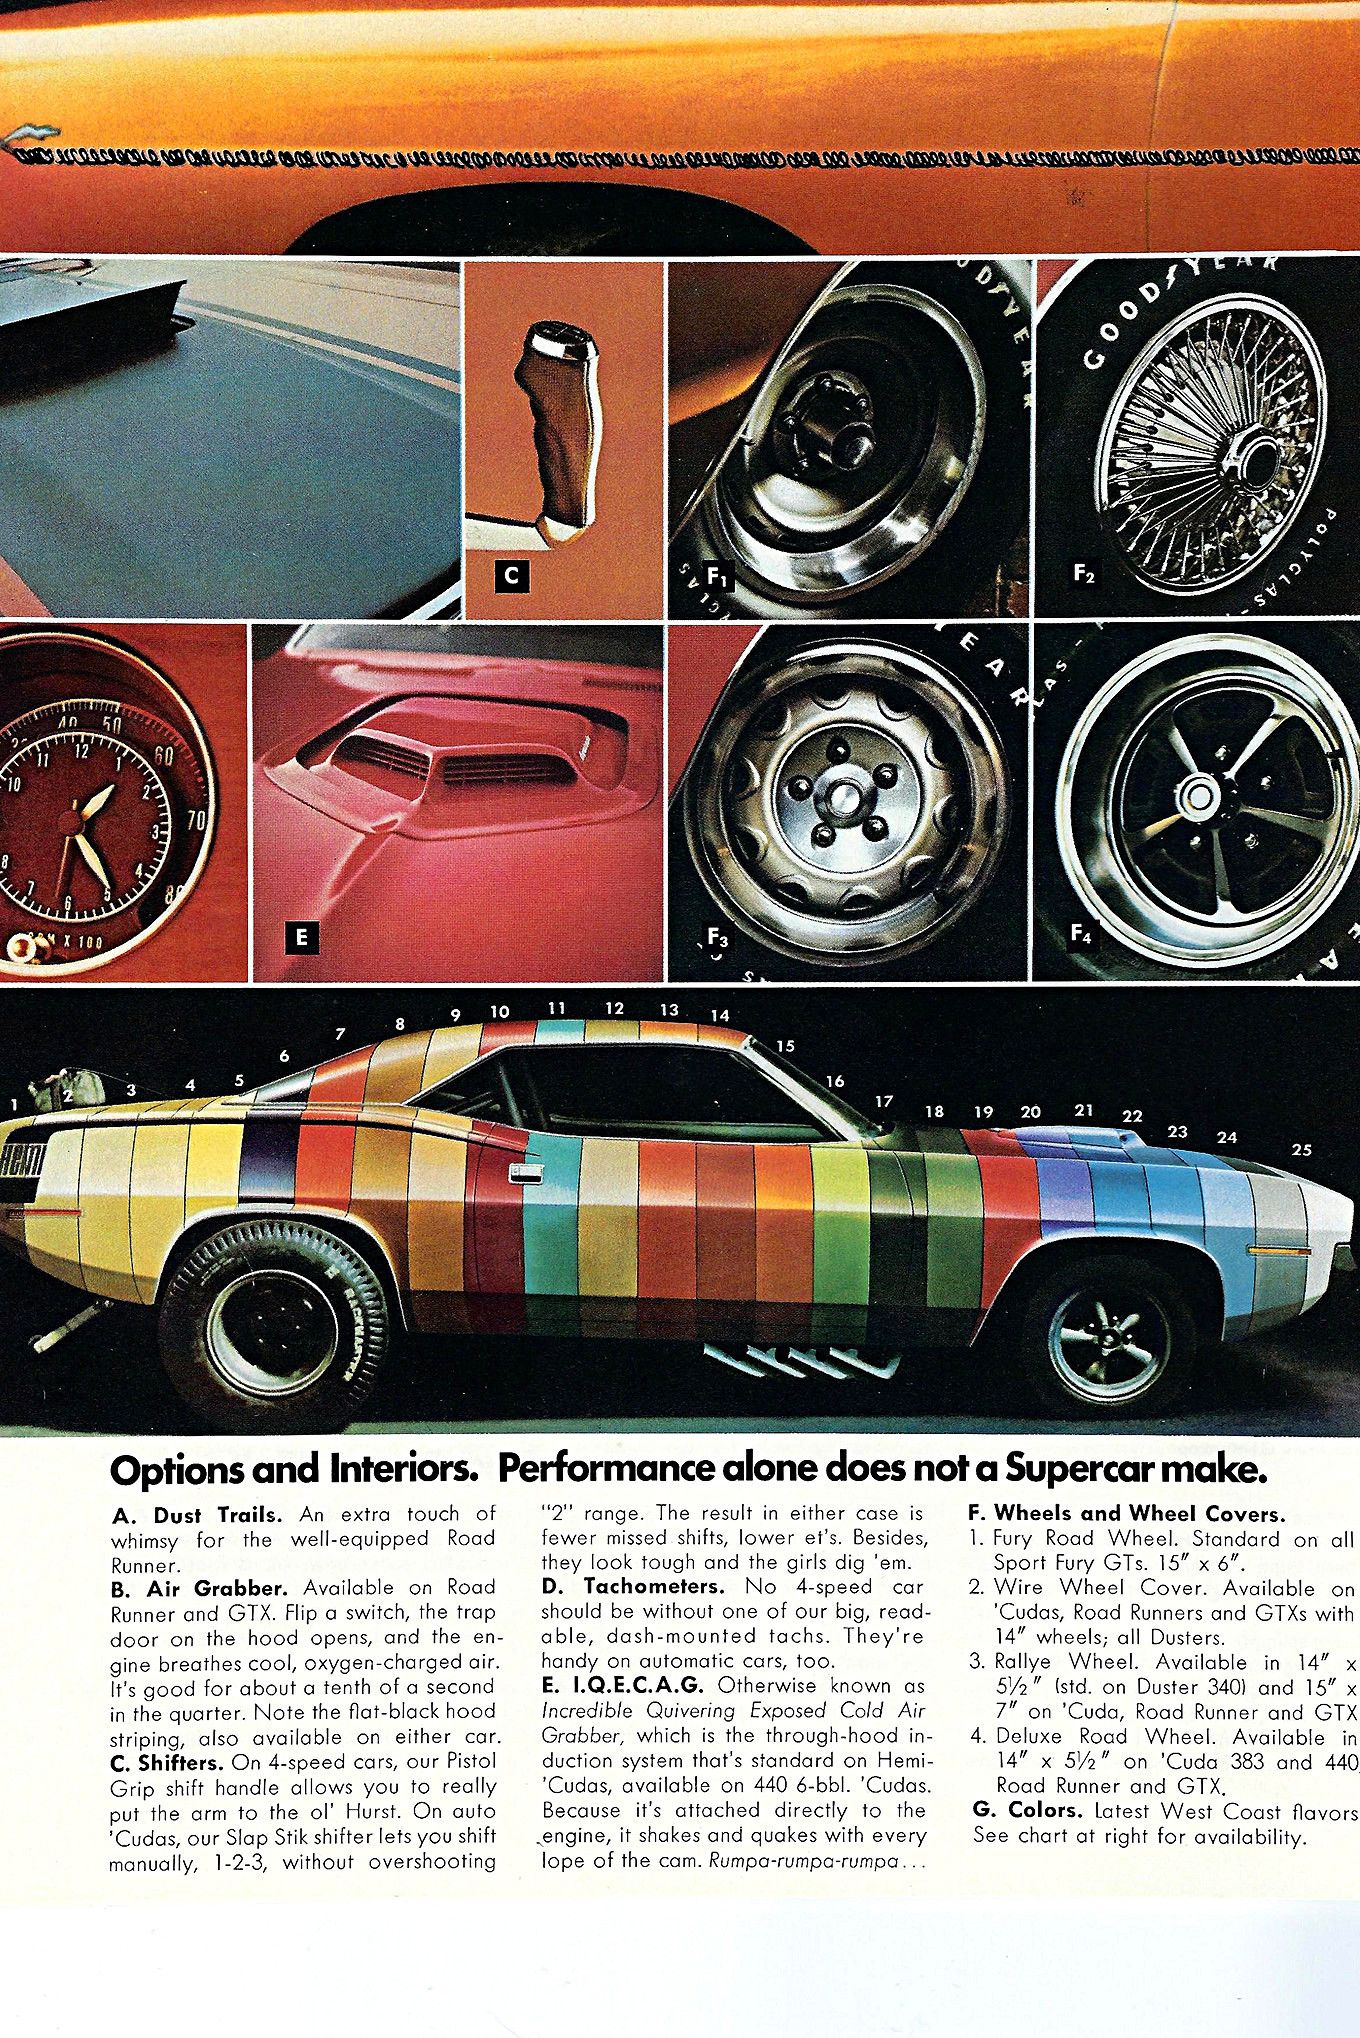 Plymouth - Barracuda - Page 1 